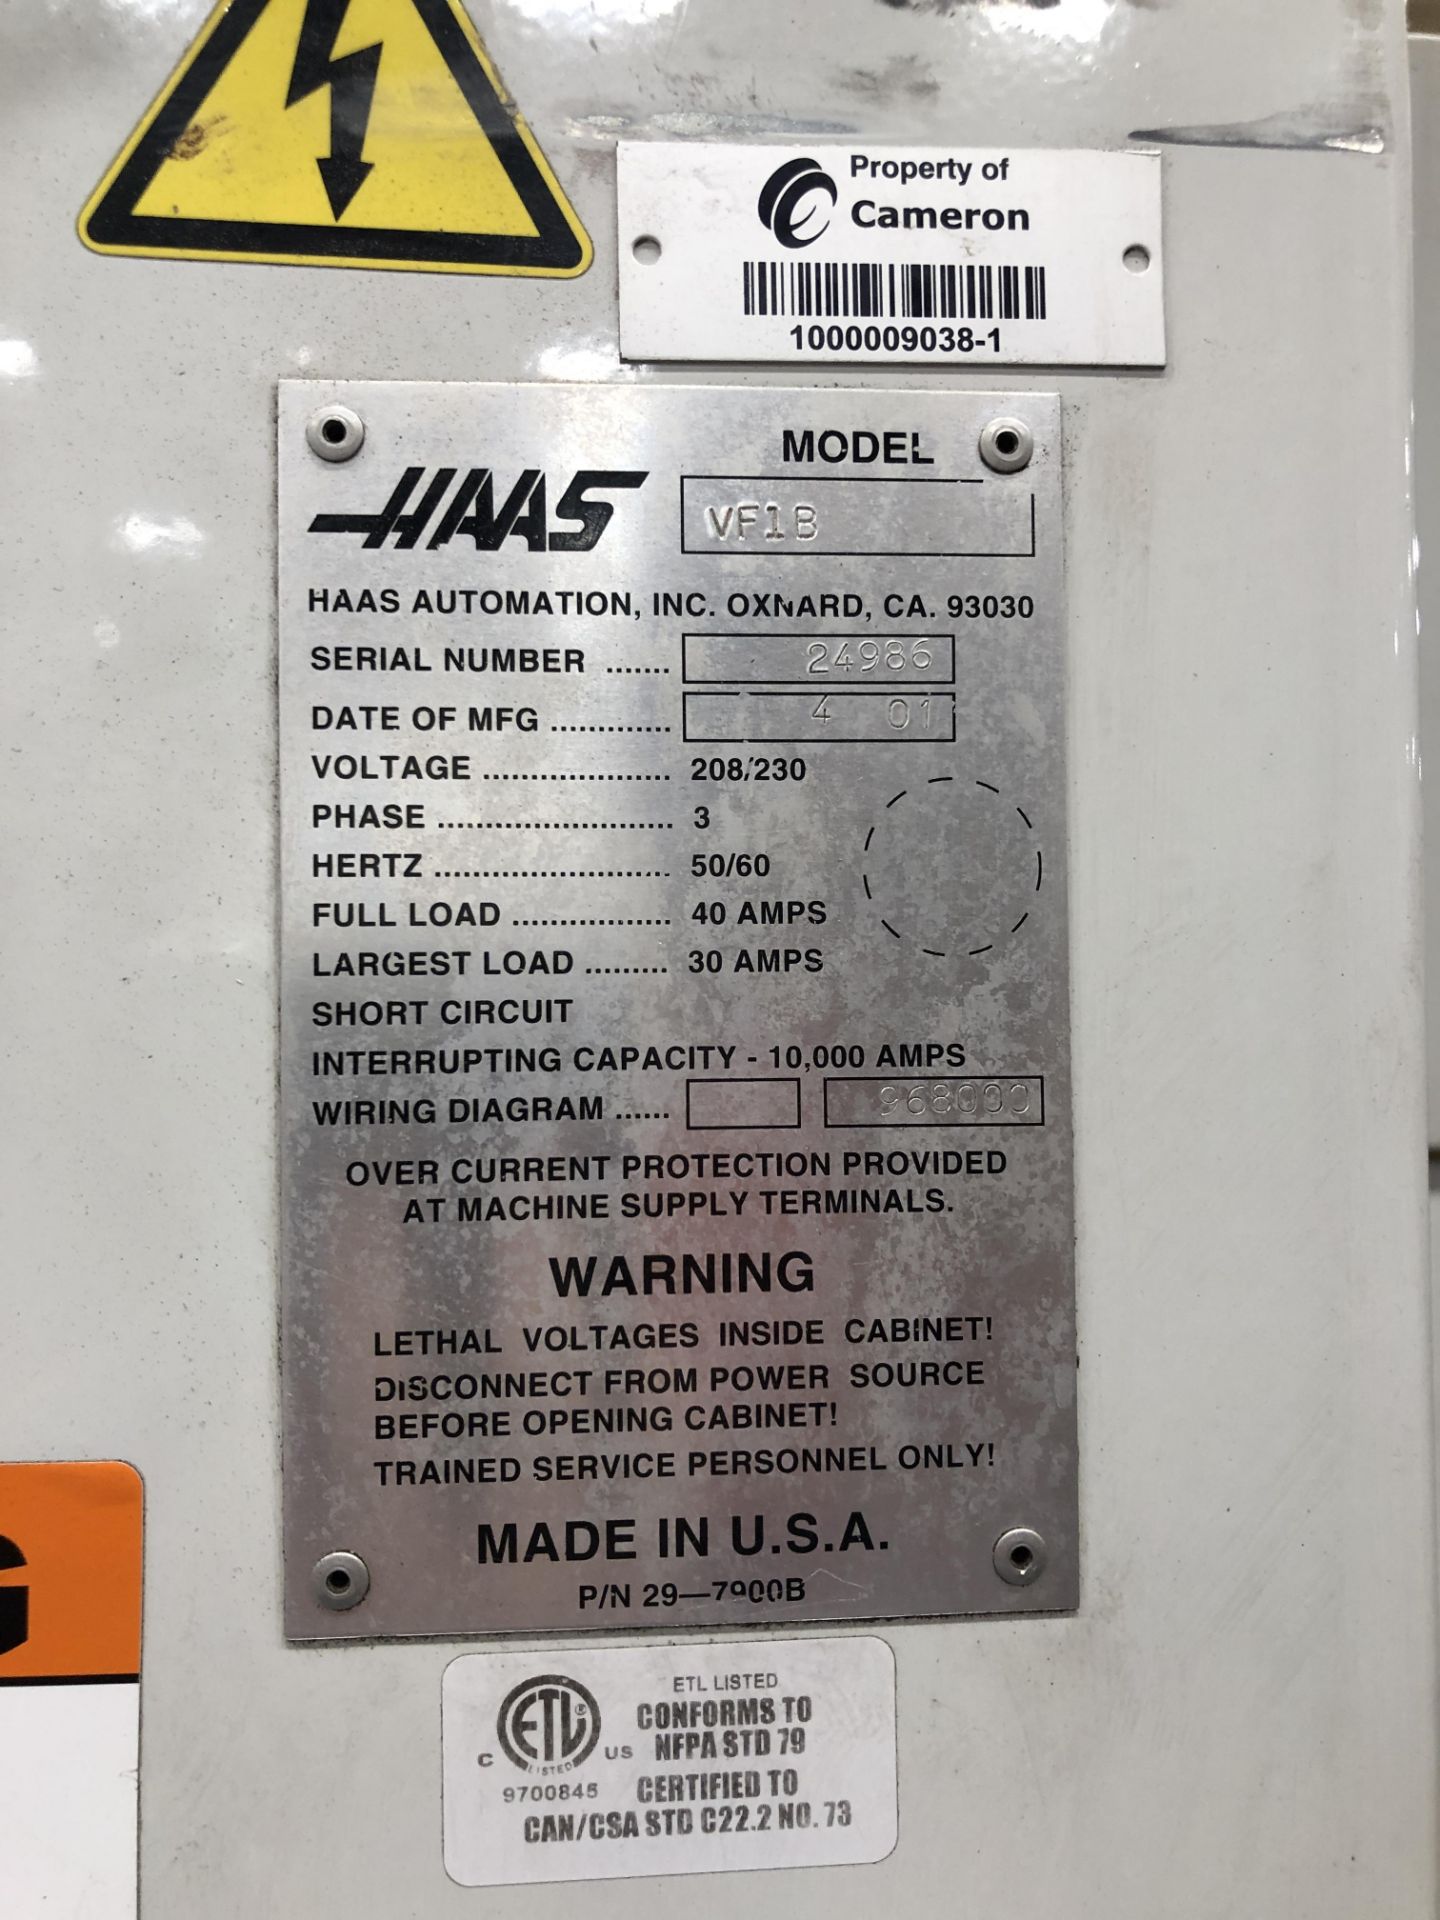 2001 Haas VF1B Vertical Milling Machine (LOCATED IN OKLAHOMA CITY, OK) - Image 7 of 8